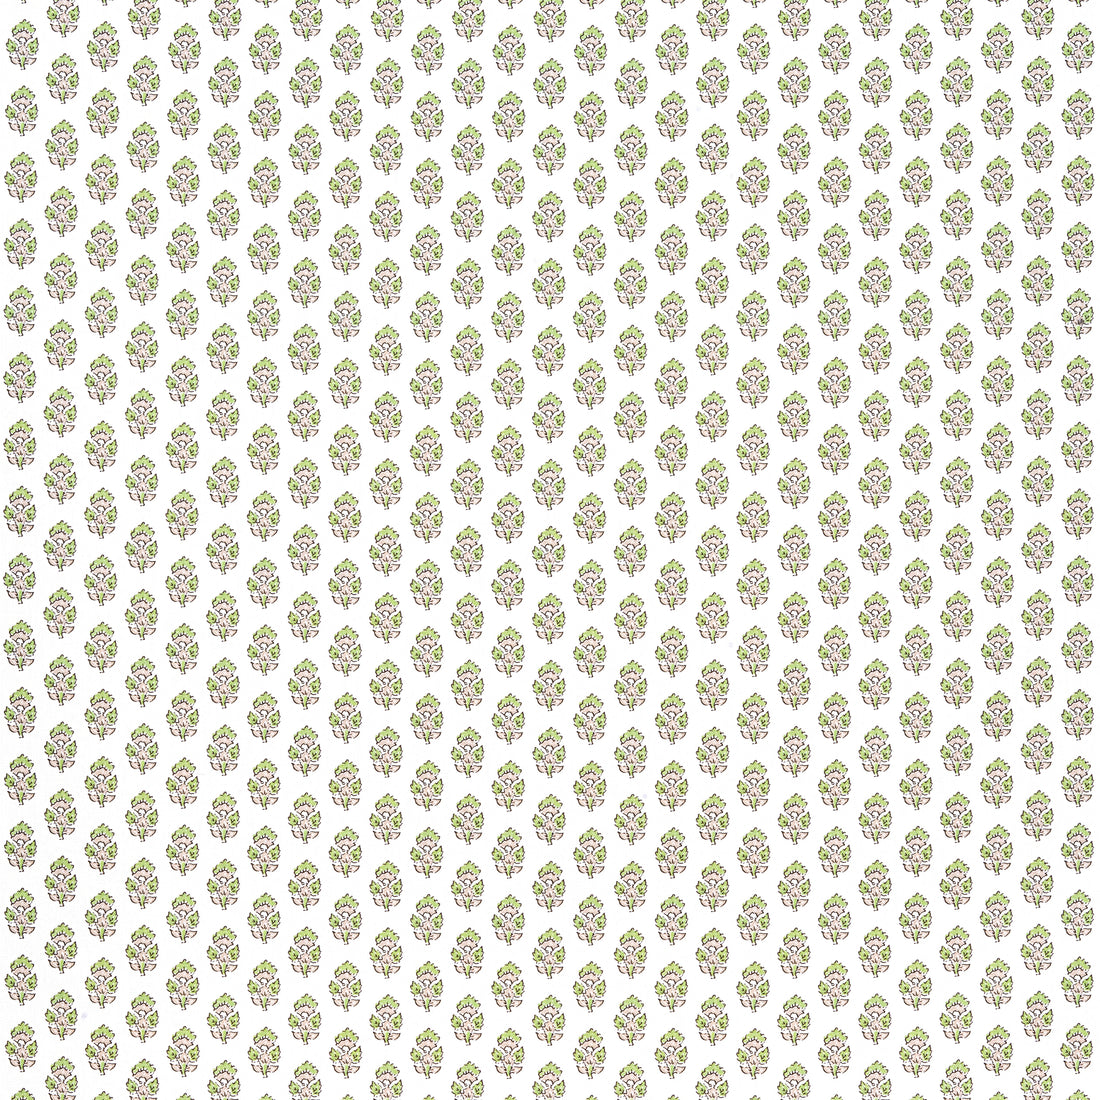 Julian fabric in green and beige color - pattern number AF15167 - by Anna French in the Antilles collection